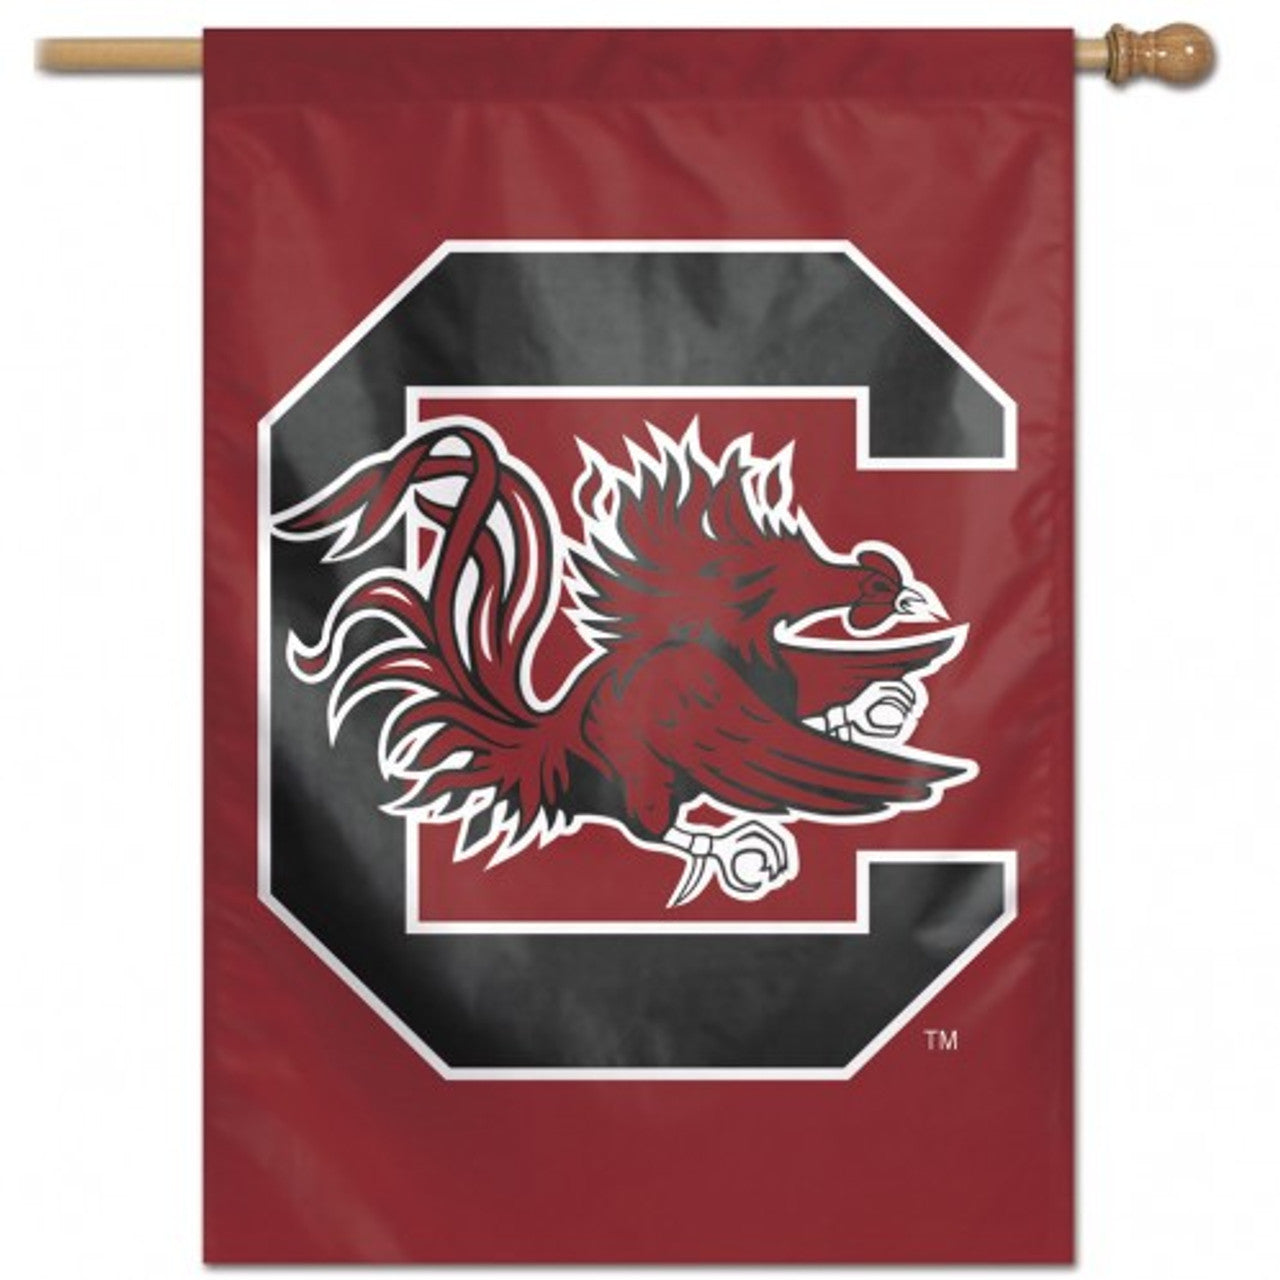 South Carolina Gamecocks 28" x 40" Vertical House Flag/Banner by Wincraft